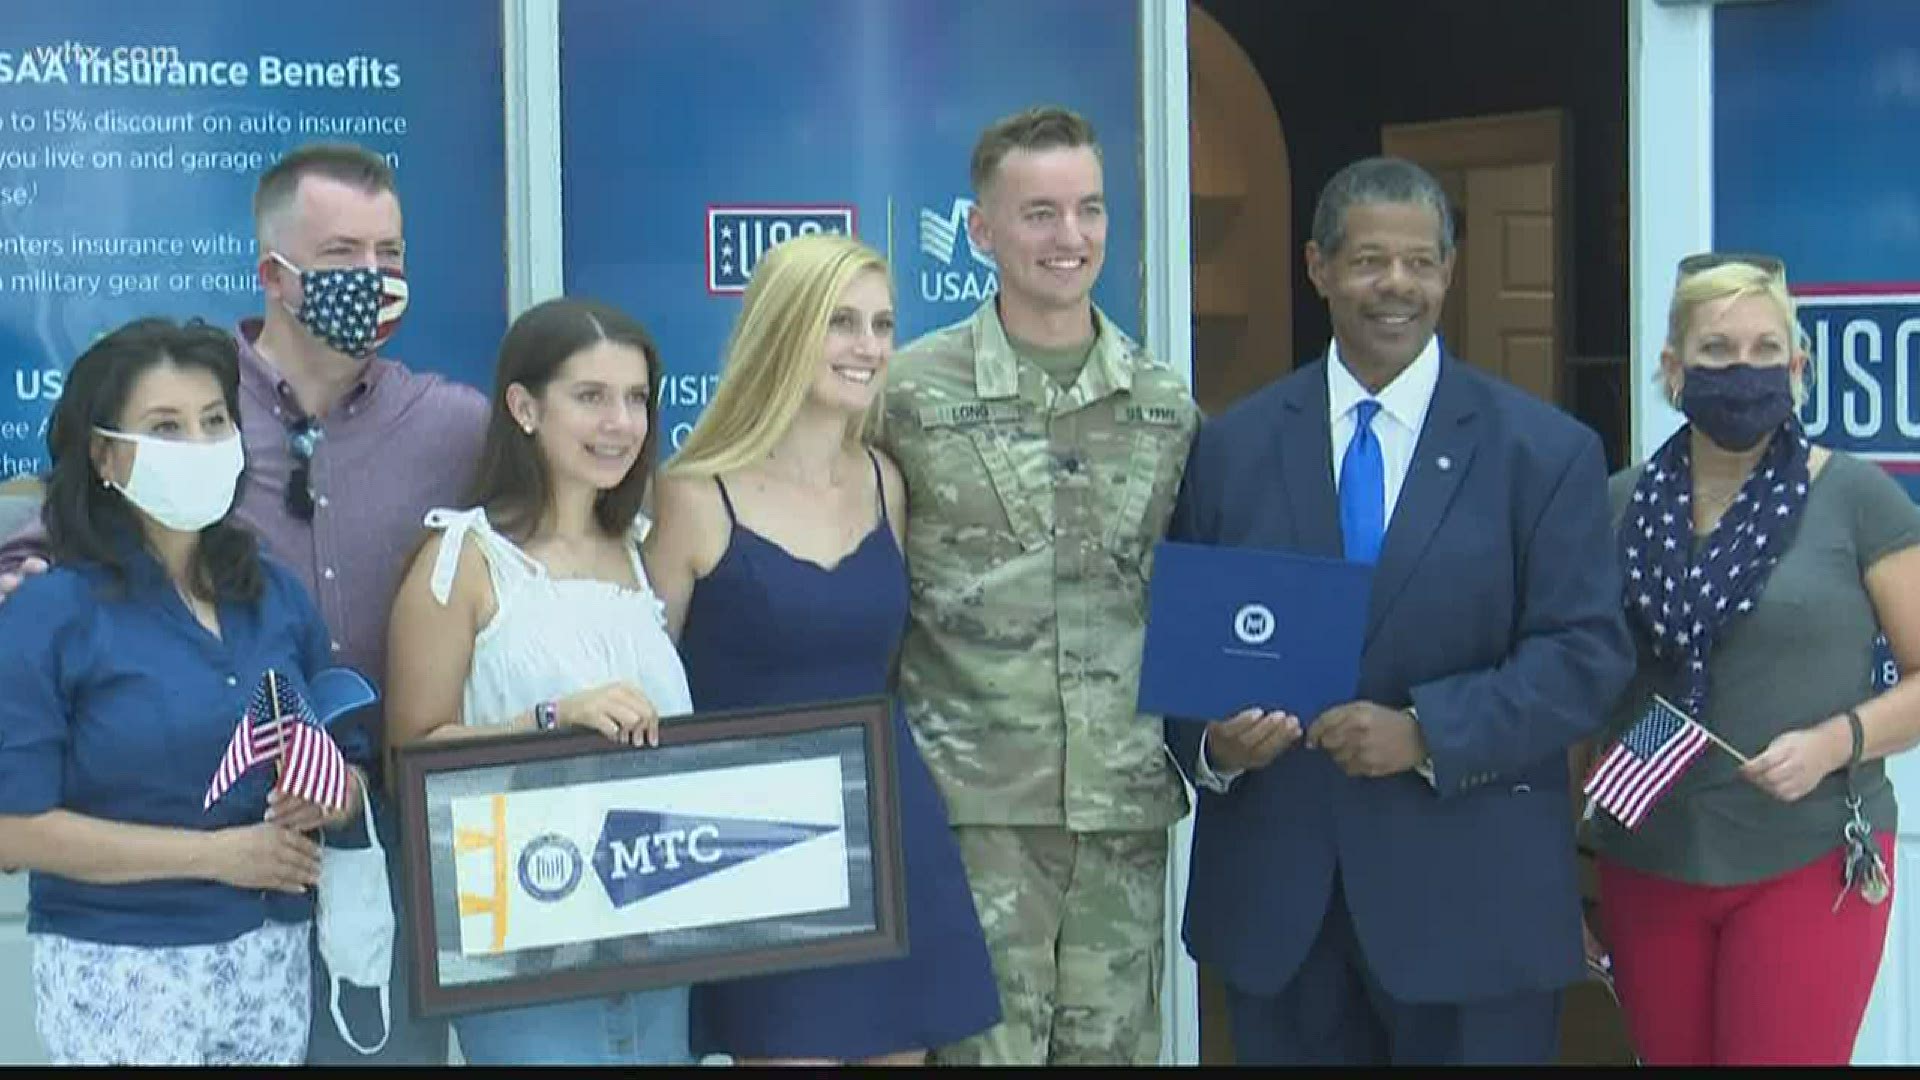 U.S. Army Spc. Douglas Long hadn't seen his family since August of 2019, when was deployed to the Middle East. Friday, he returned home to his family and his degree.